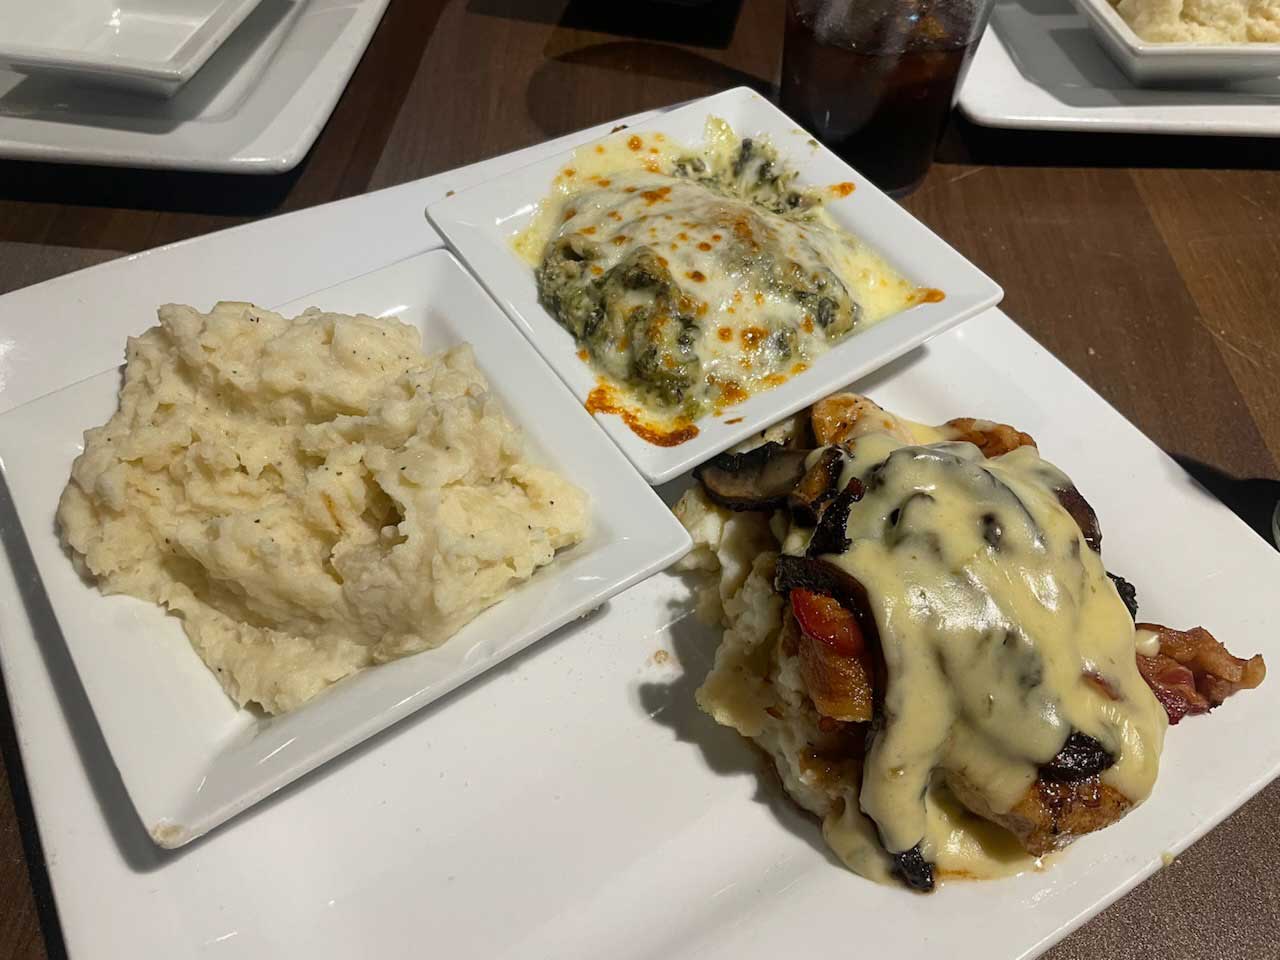 Chicken with mushrooms and cheese from Curklins Restaurant